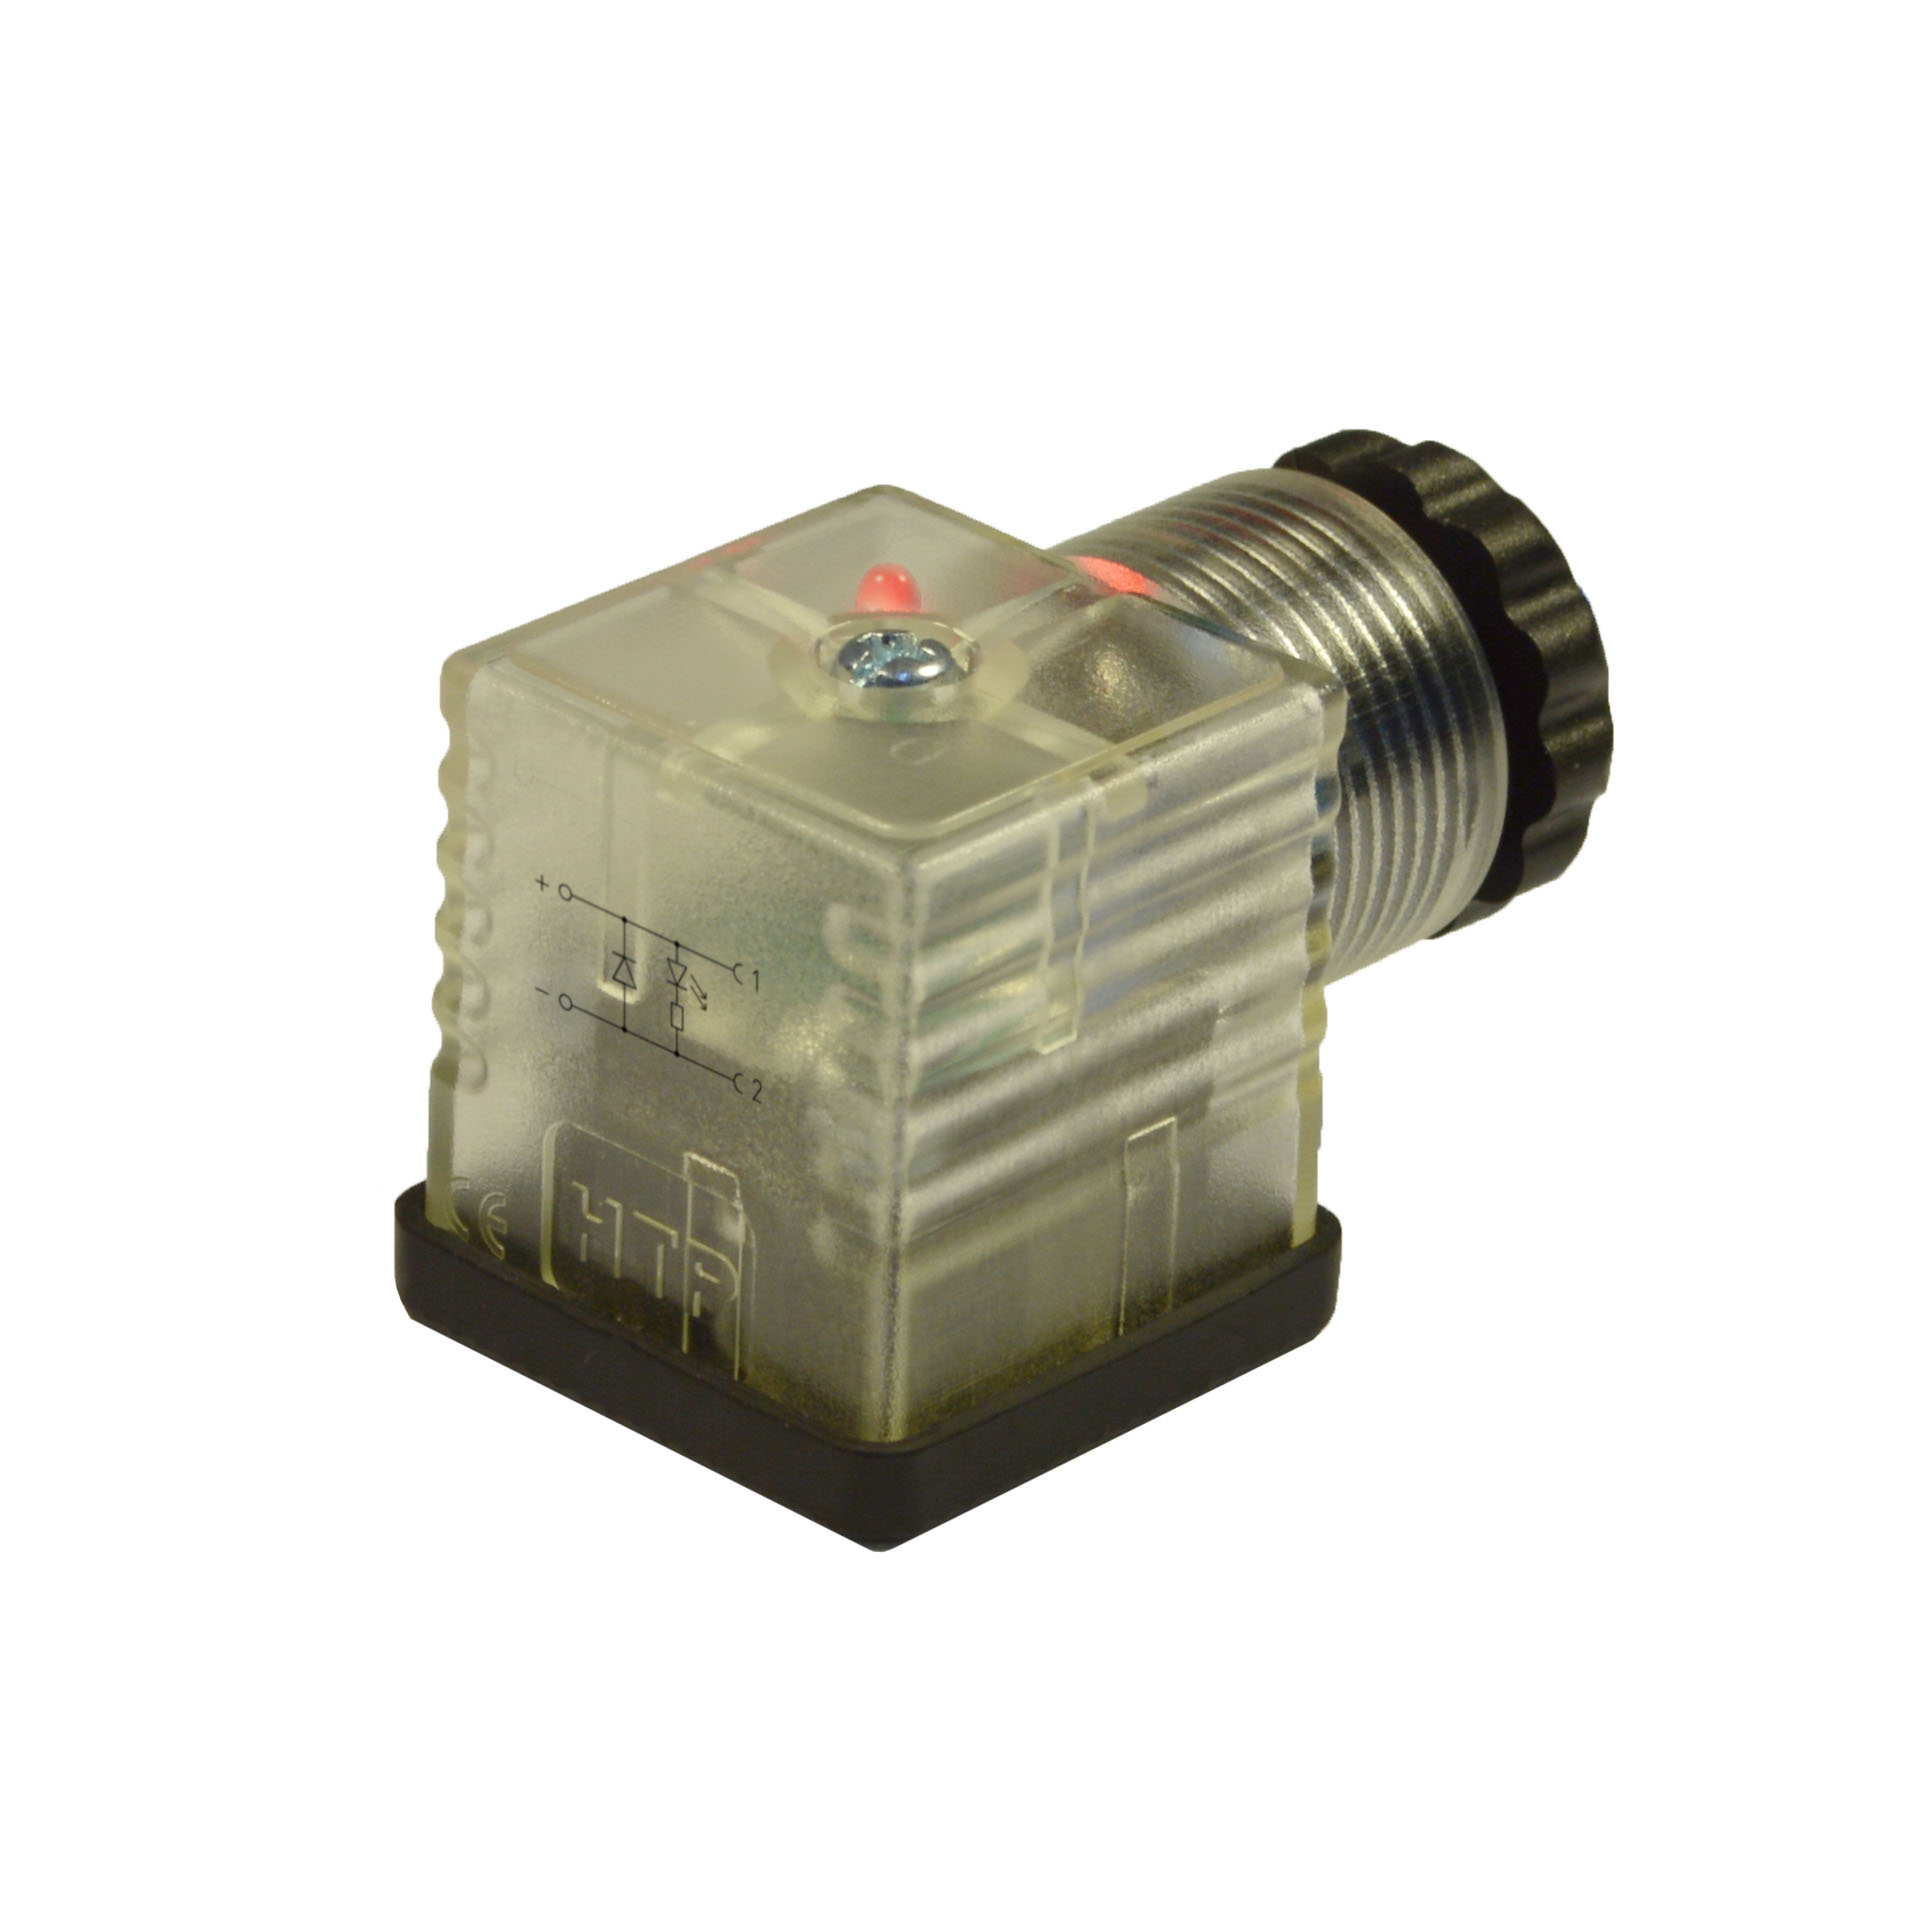 EN175301-803(typeA)field attachable,2p+PE(h.12),Red LED+diode 3A,24VDC,PG9/11unif.